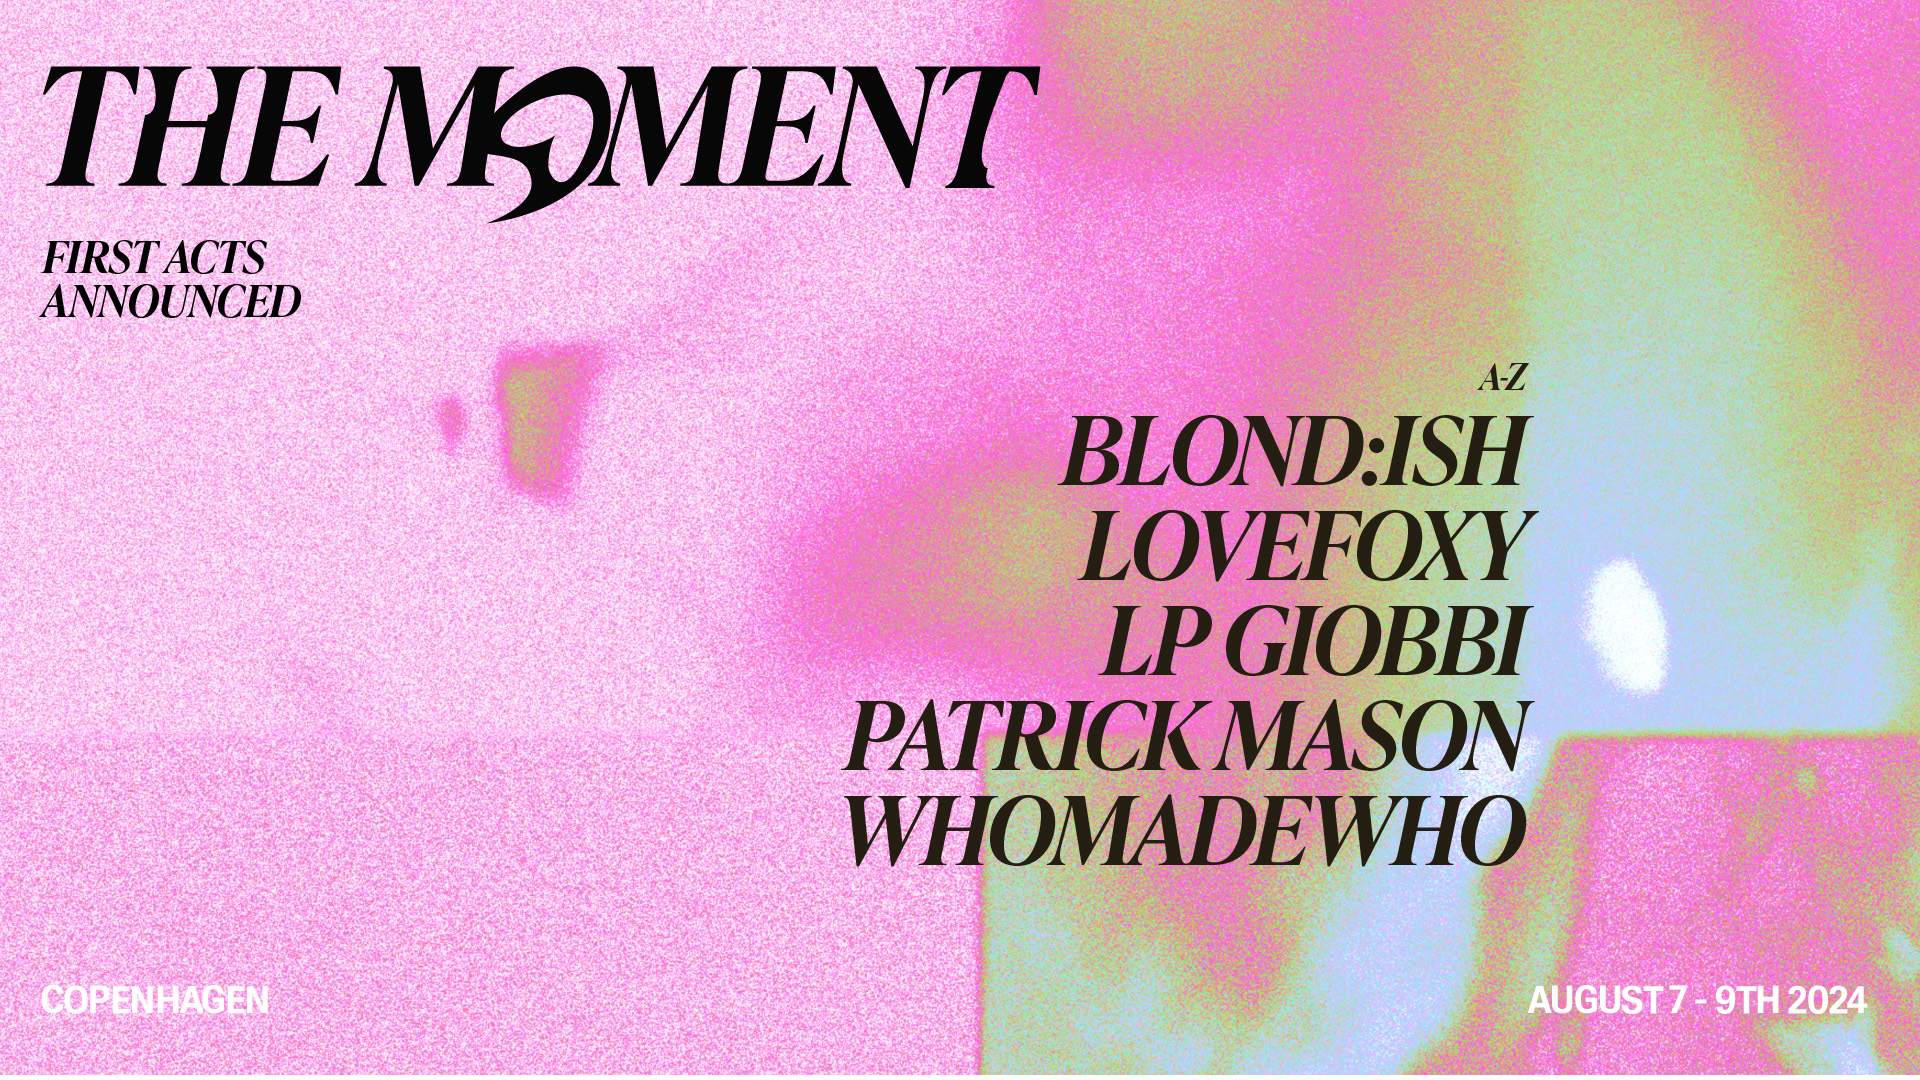 WhoMadeWho presents: THE MOMENT 7- 9TH OF AUGUST 2024 - Página frontal